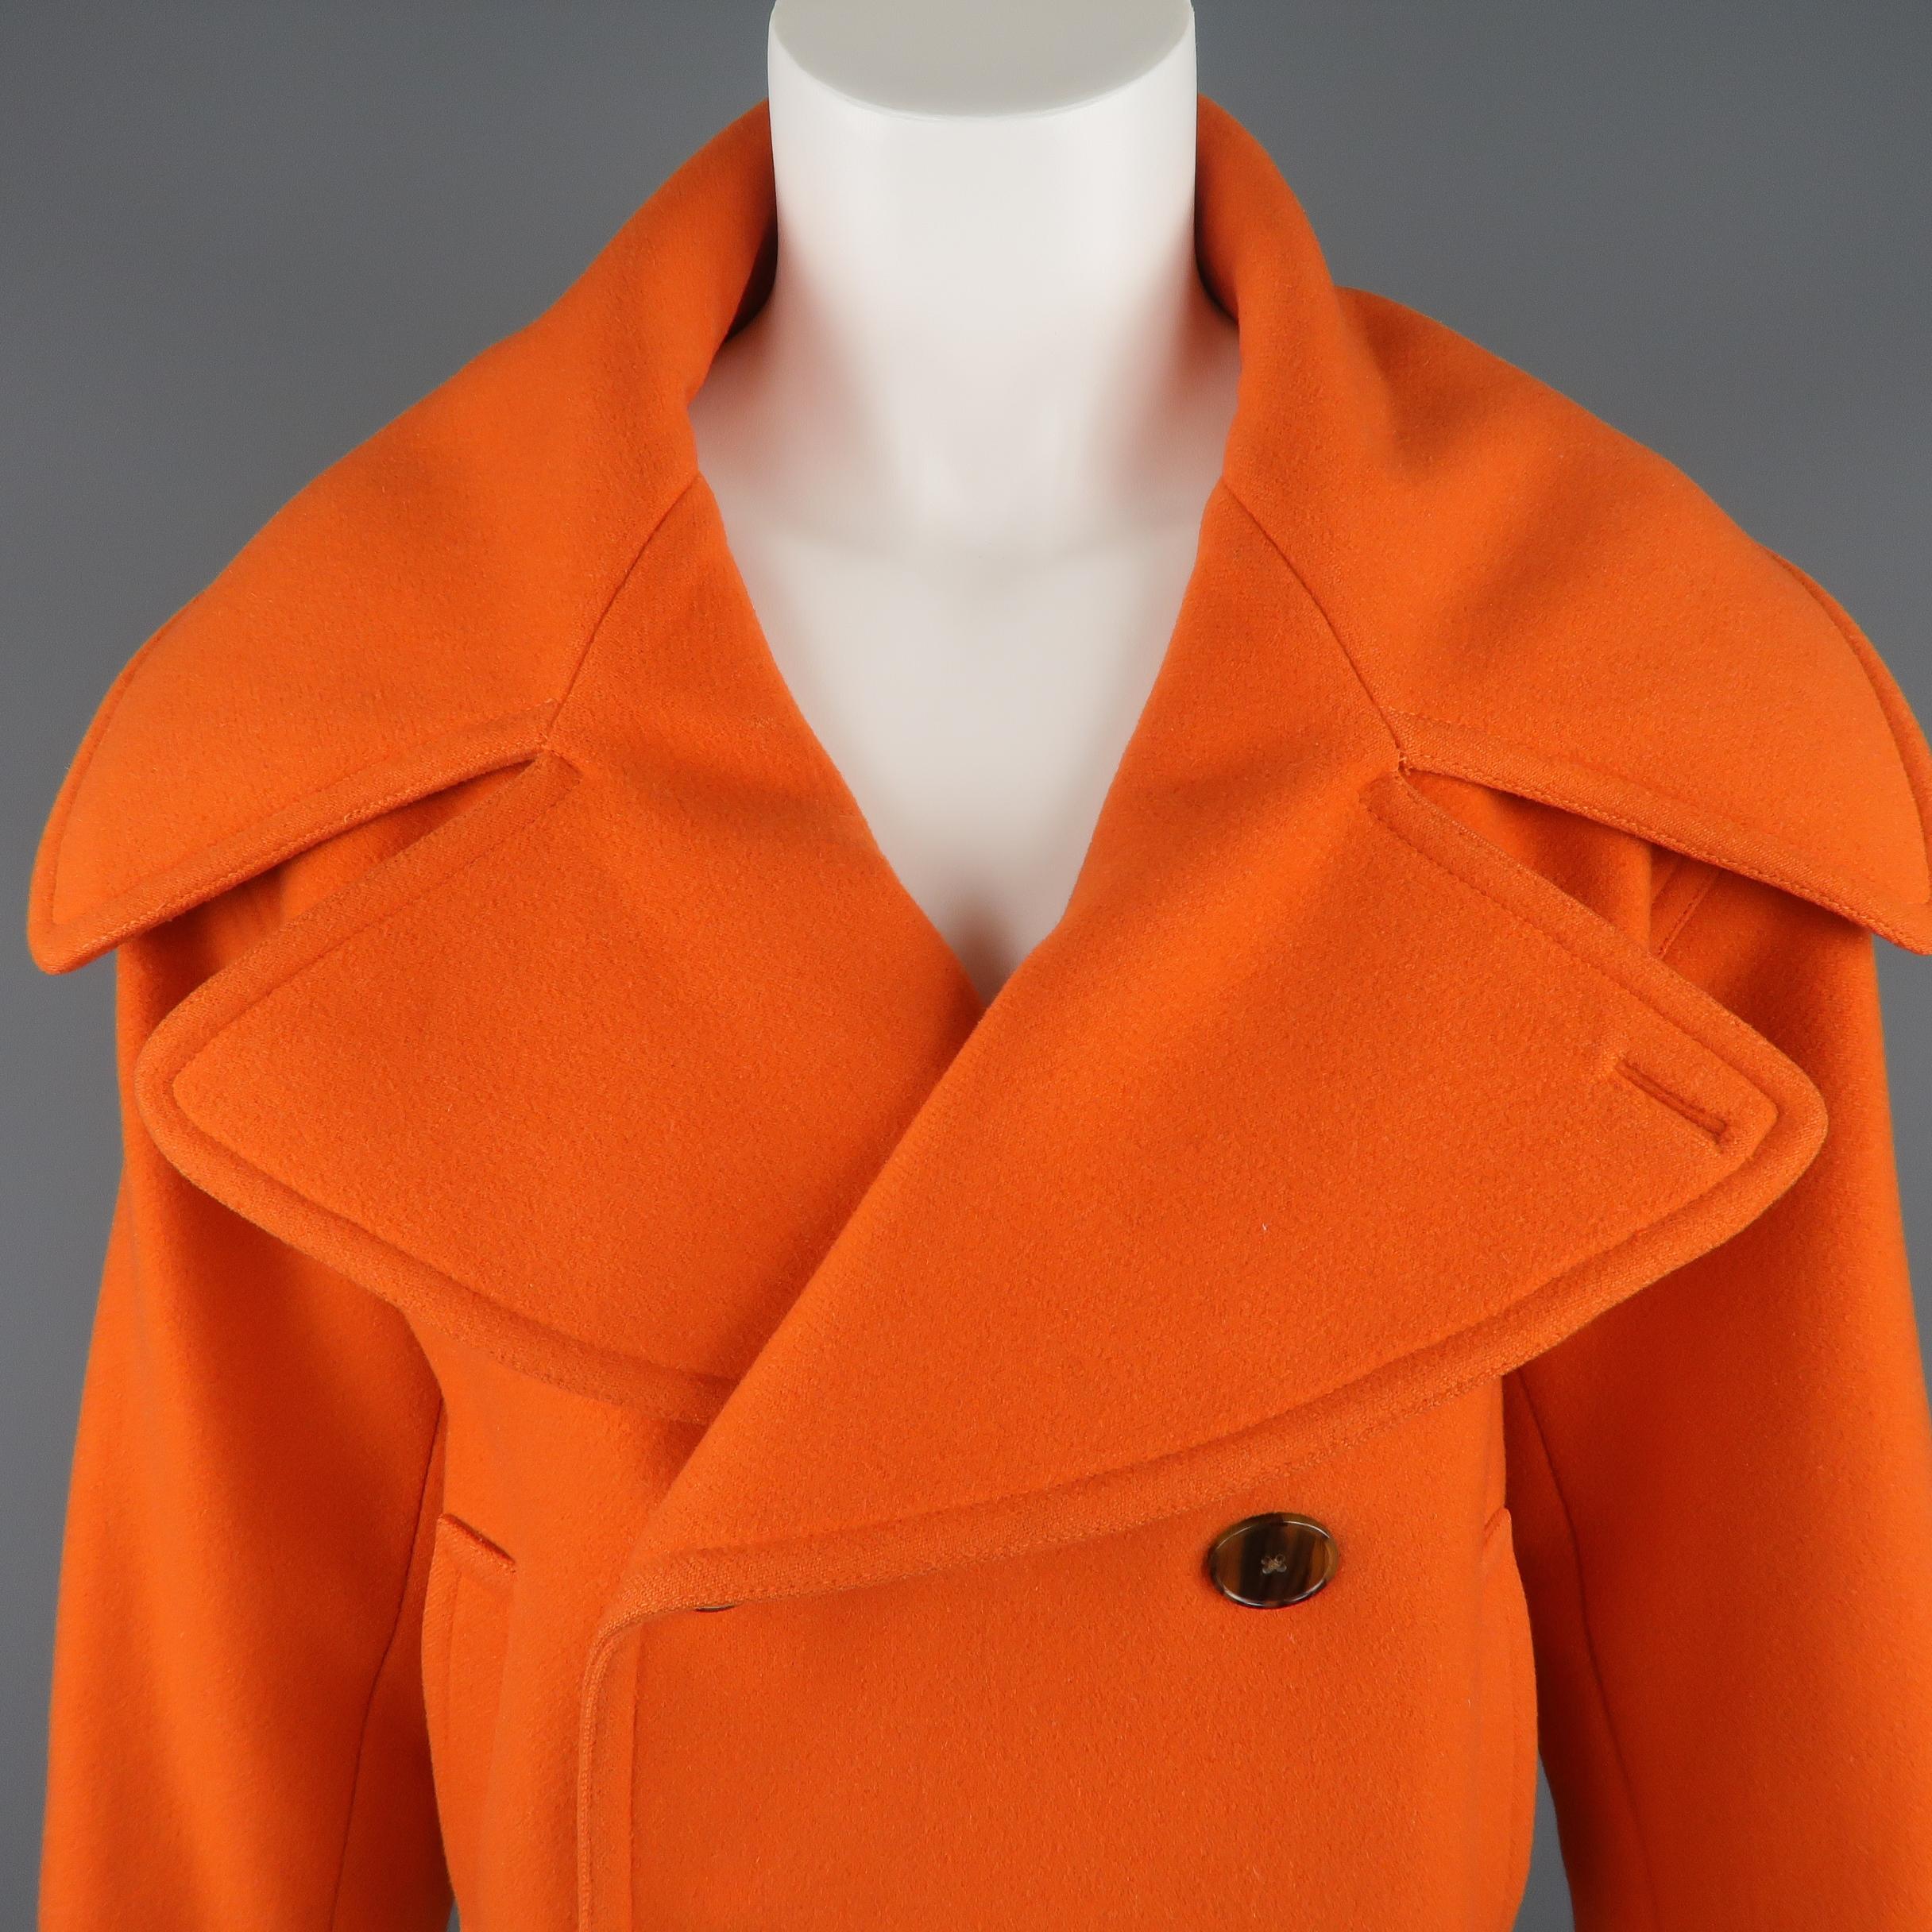 RALPH LAUREN COLLECTION cropped peacoat style jacket comes in orange flannel with an oversized collar, double breasted button front, cuffed sleeves, and slit pockets.
 
Good Pre-Owned Condition.
Marked: (no size)
 
Measurements:
 
Shoulder: 18